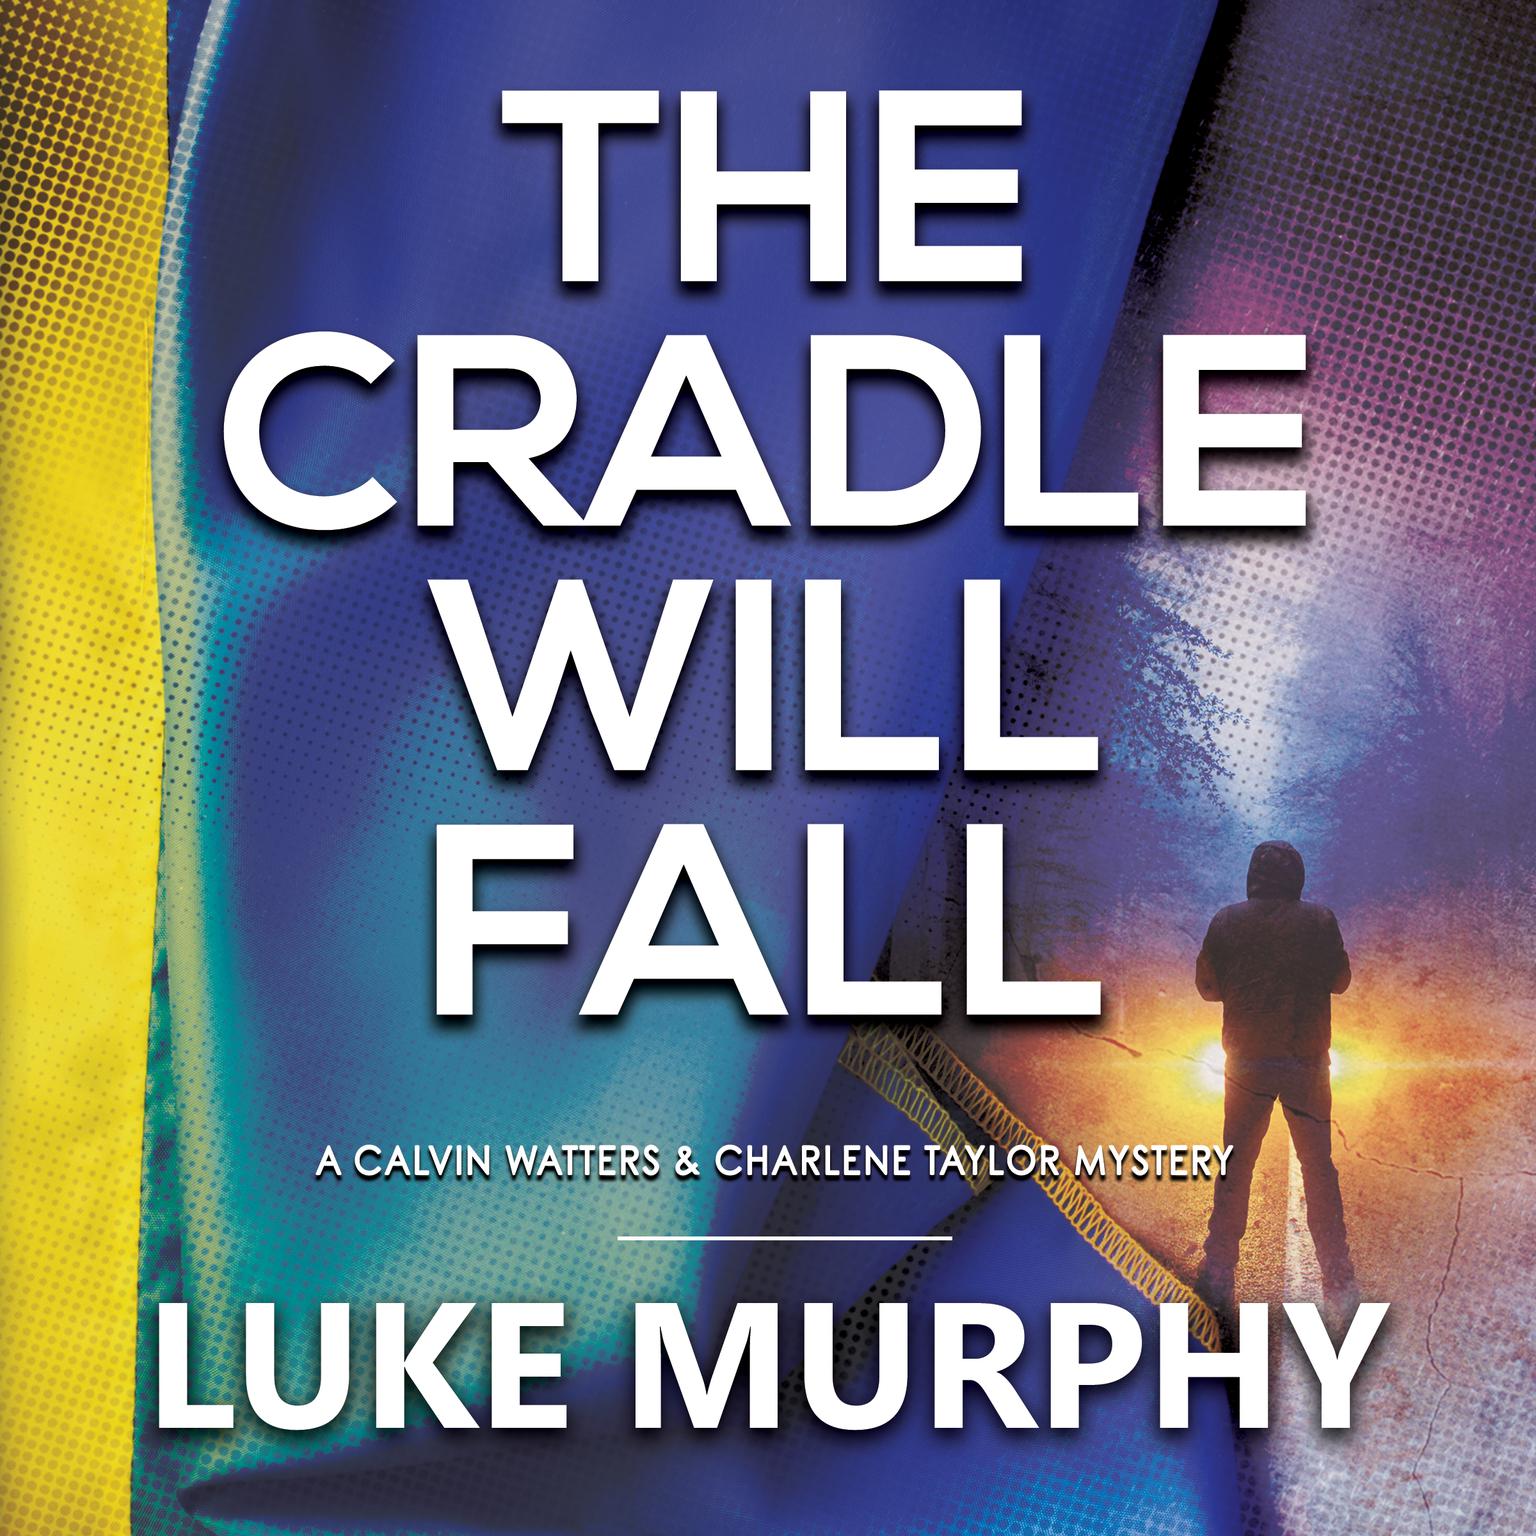 The Cradle Will Fall: A Calvin Watters & Charlene Taylor Mystery  Audiobook, by Luke Murphy